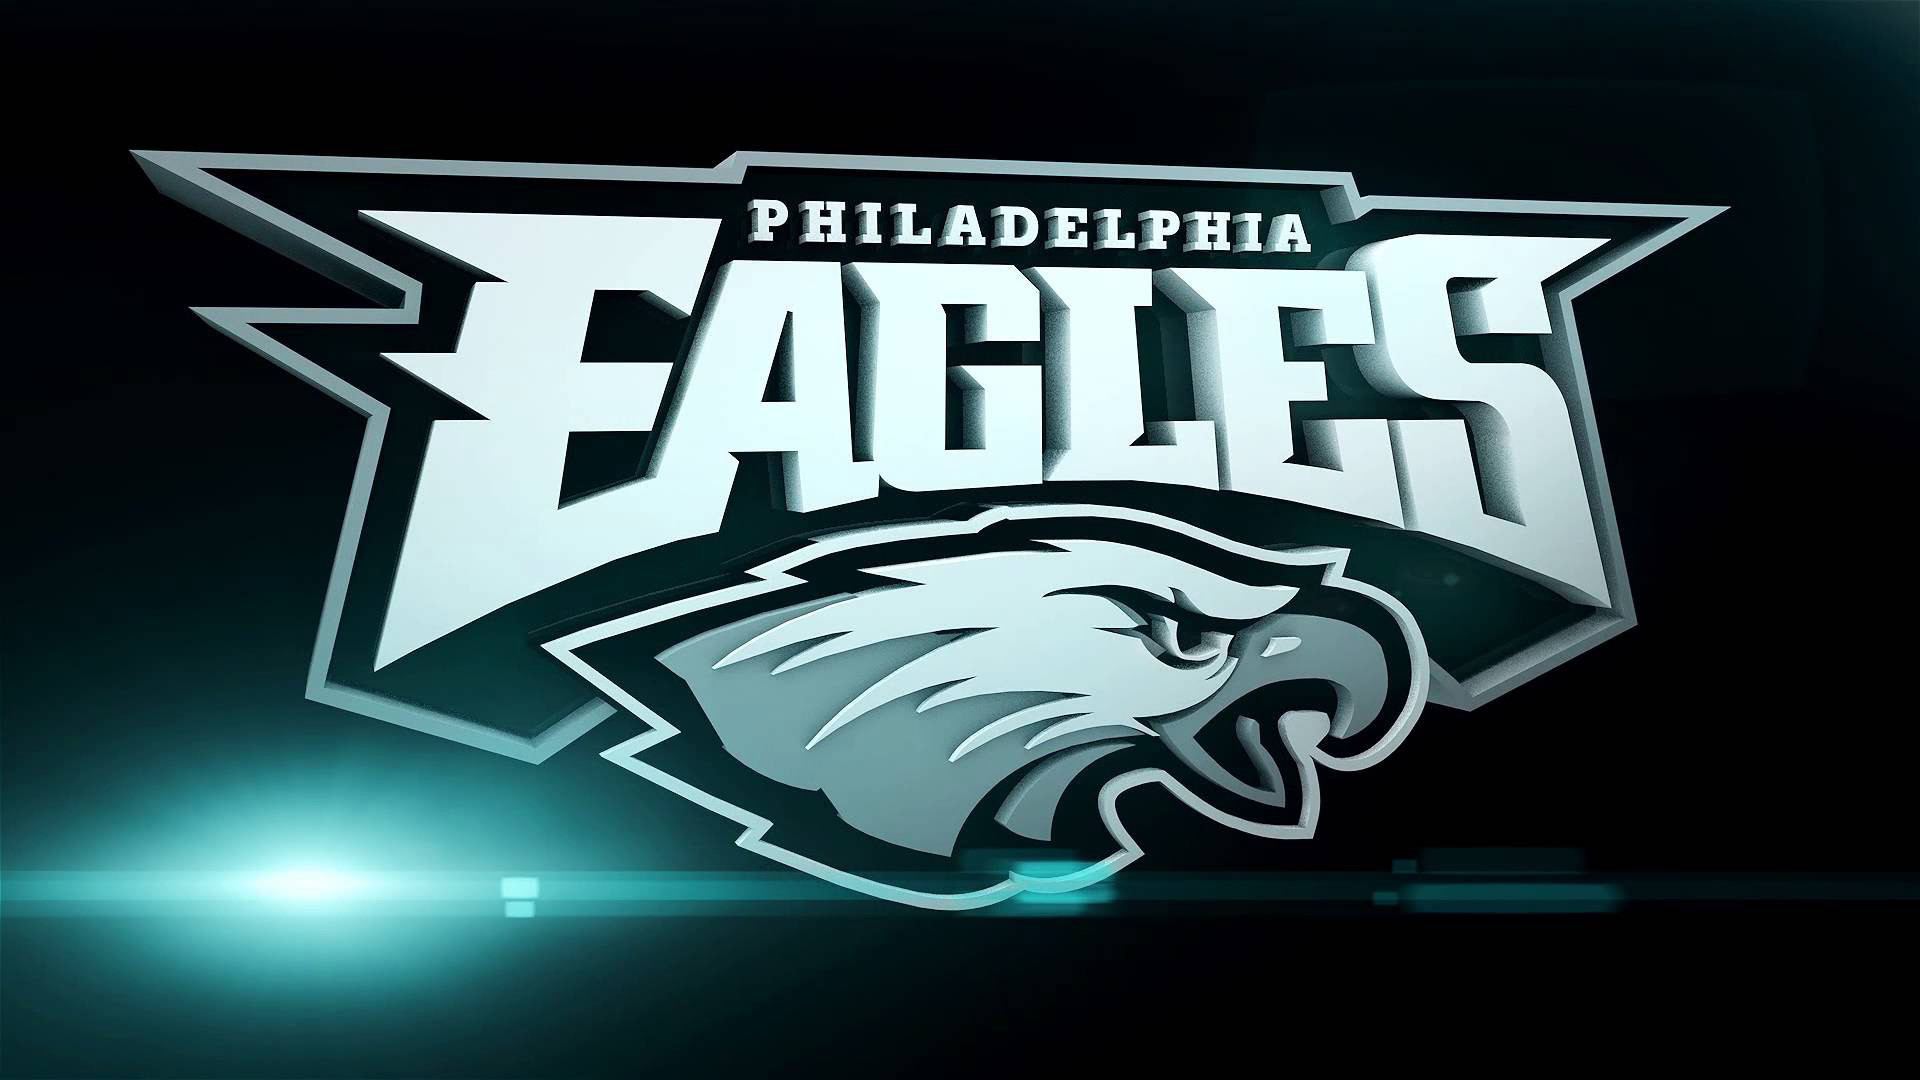 Philadelphia Eagles Wallpapers Wallpaper HD Wallpapers Pinterest Philadelphia eagles wallpaper, Wallpaper and Wallpaper backgrounds